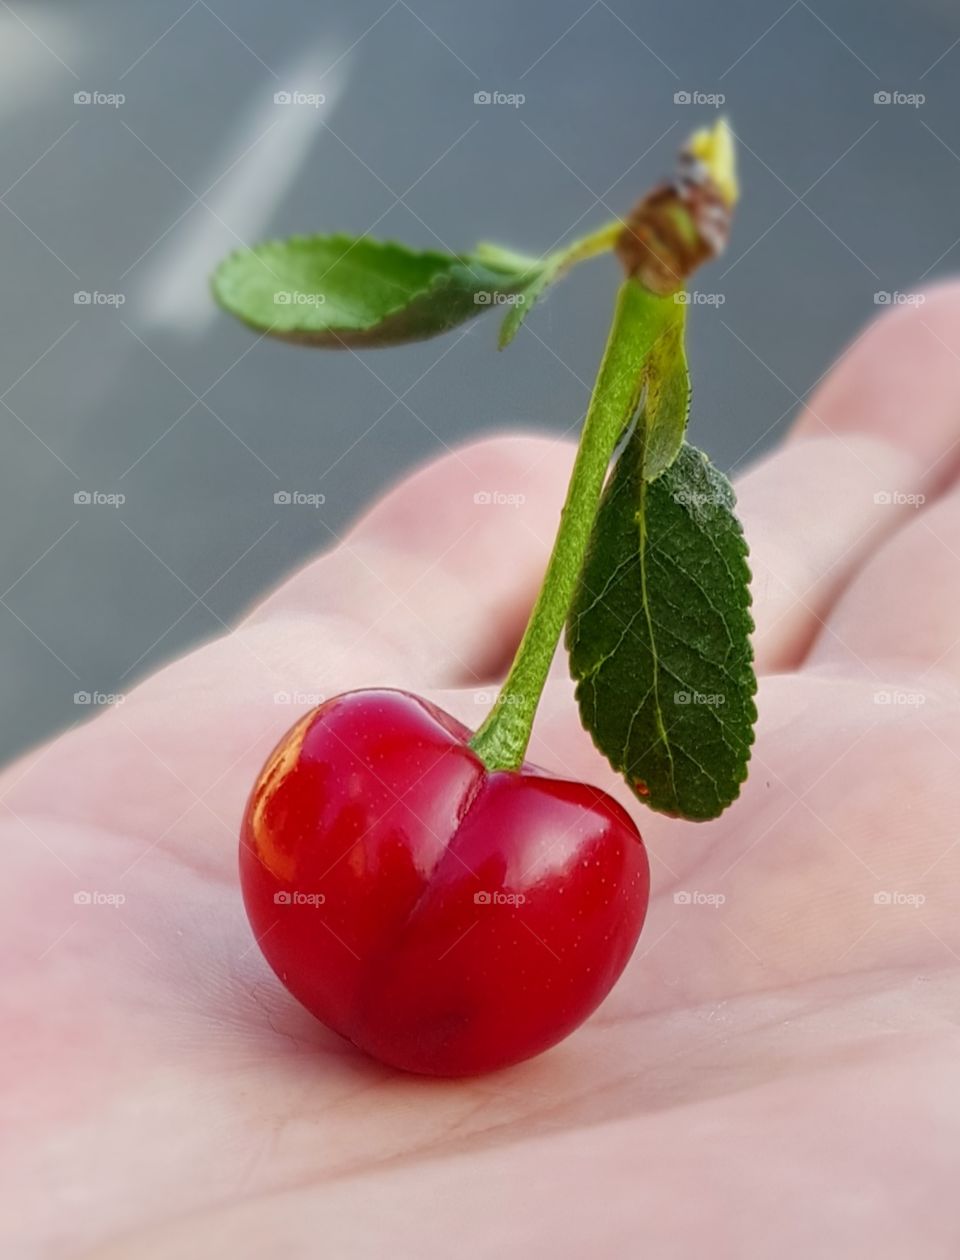 sweet and delicious cherry